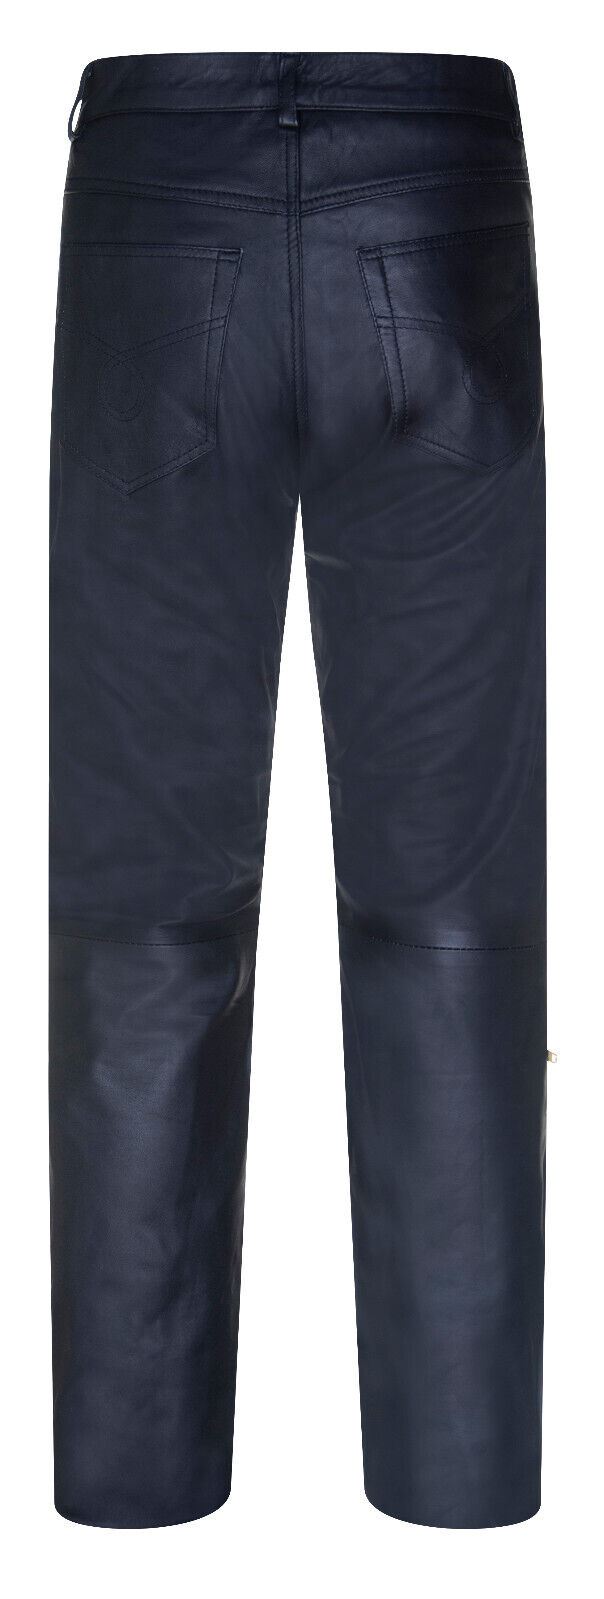 Mens Comfort Leather Zip Jeans-Harlow - Upperclass Fashions 